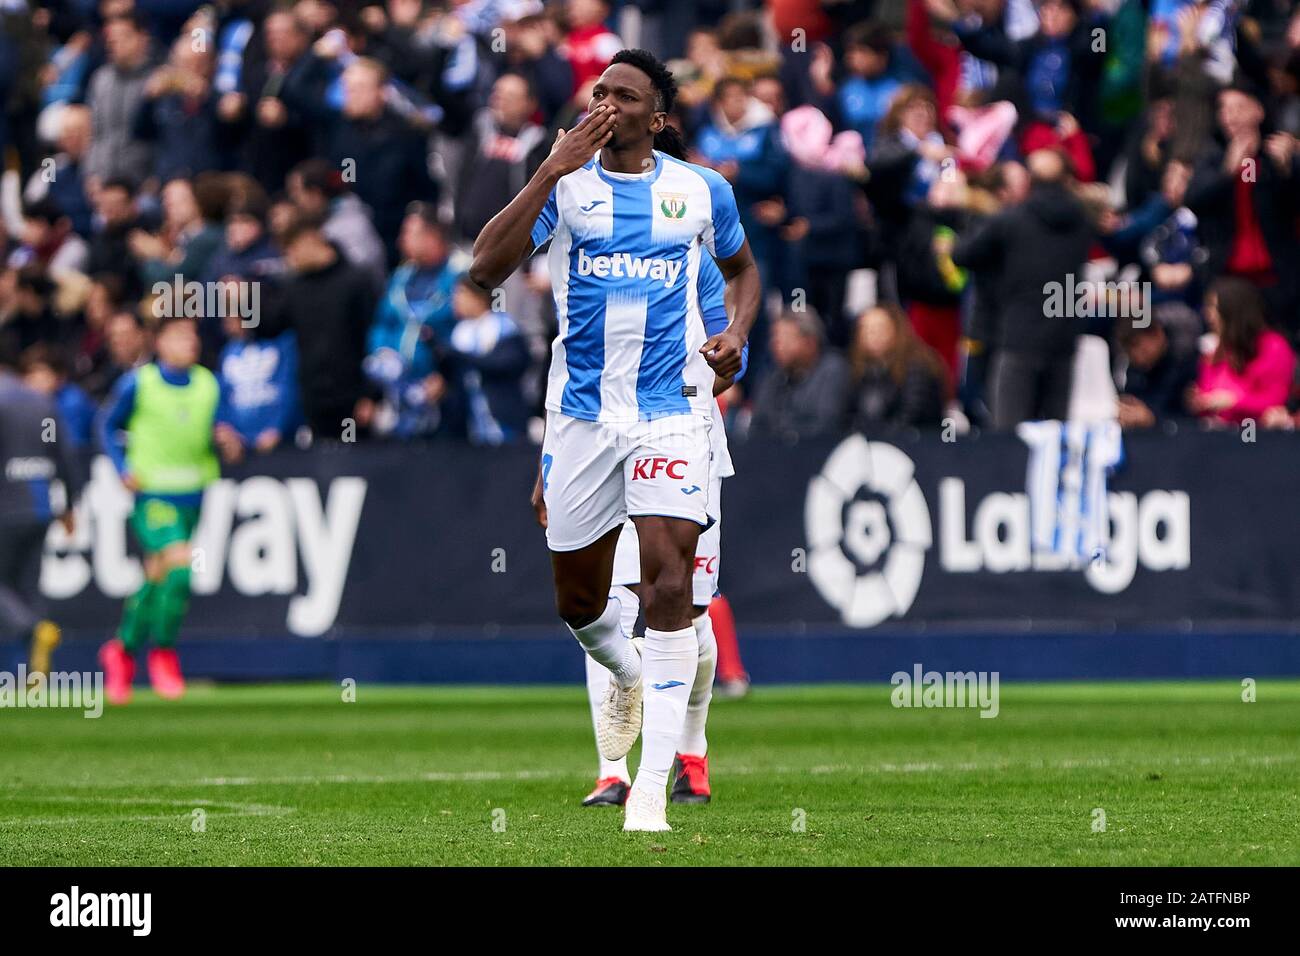 Kenneth Josiah Omeruo of CD Leganes celebrates a goal during the La Liga football match between CD Leganes and Real Sociedad at Butarque Stadium in Leganes.(Final score; CD Leganes 2:1Real Sociedad) Stock Photo